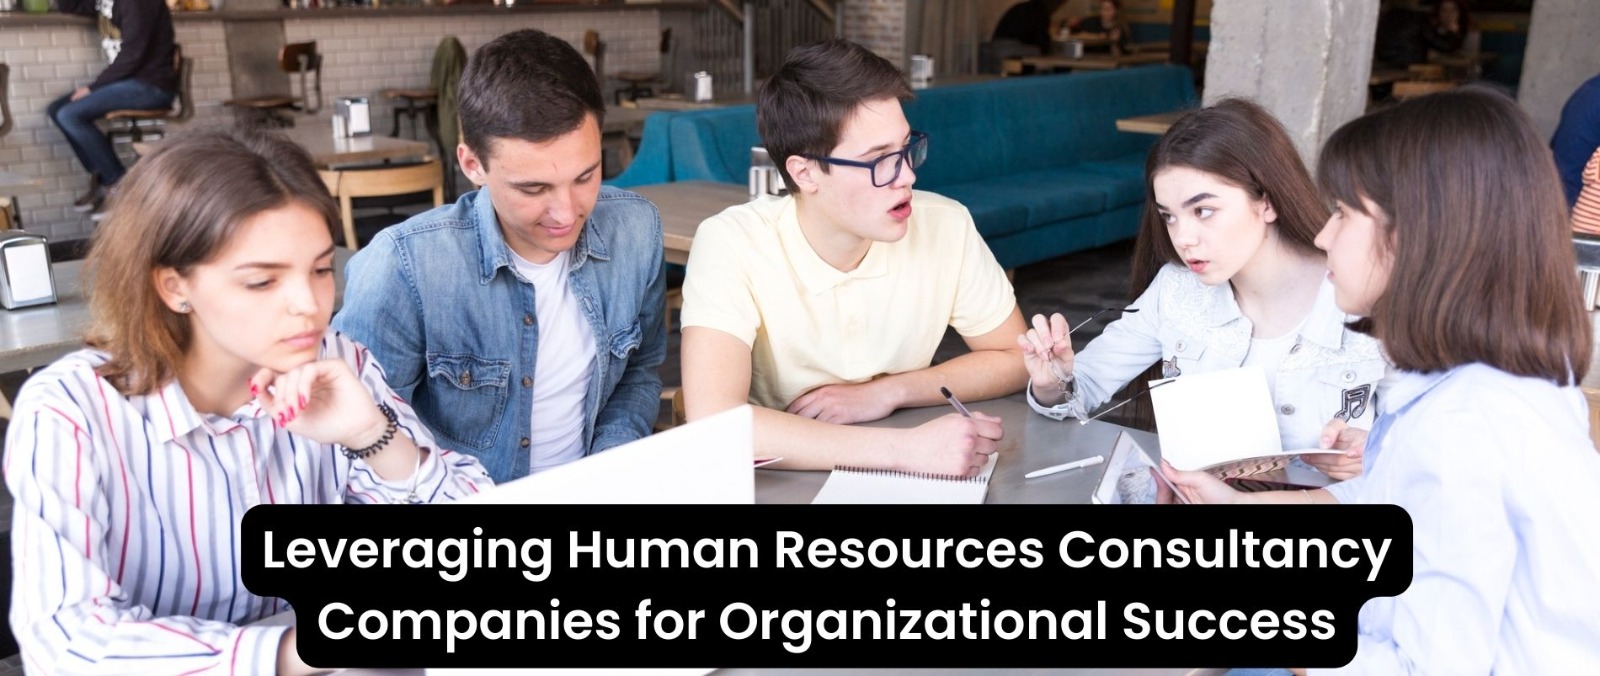 Leveraging Human Resources Consultancy Companies for Organizational Success